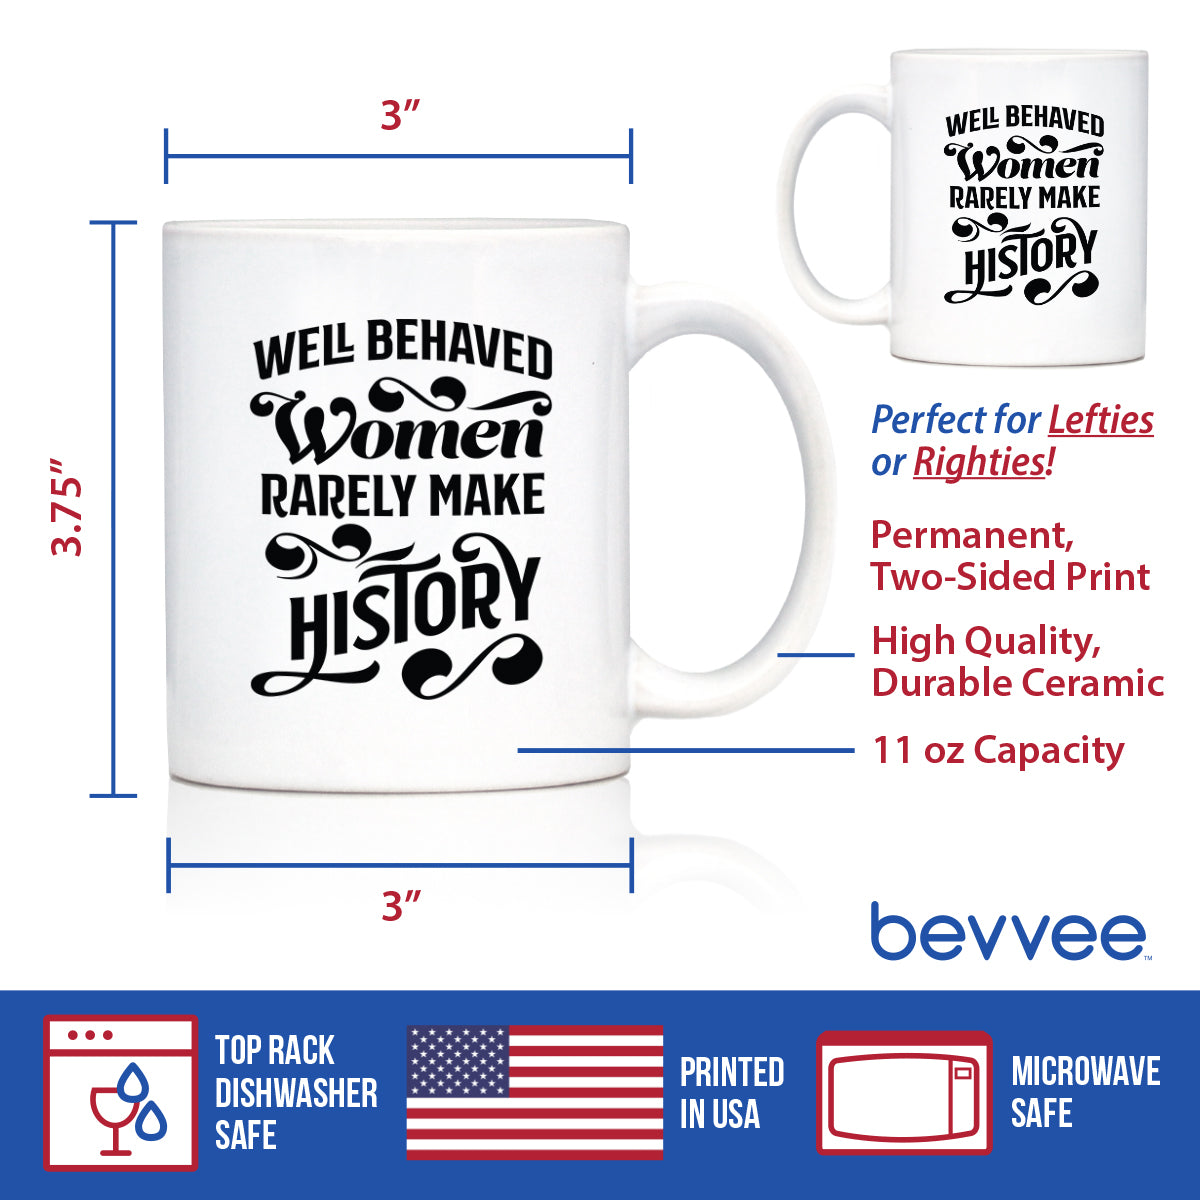 Well Behaved Women Rarely Make History Coffee Mug - Funny Feminism Gifts &amp; Decor